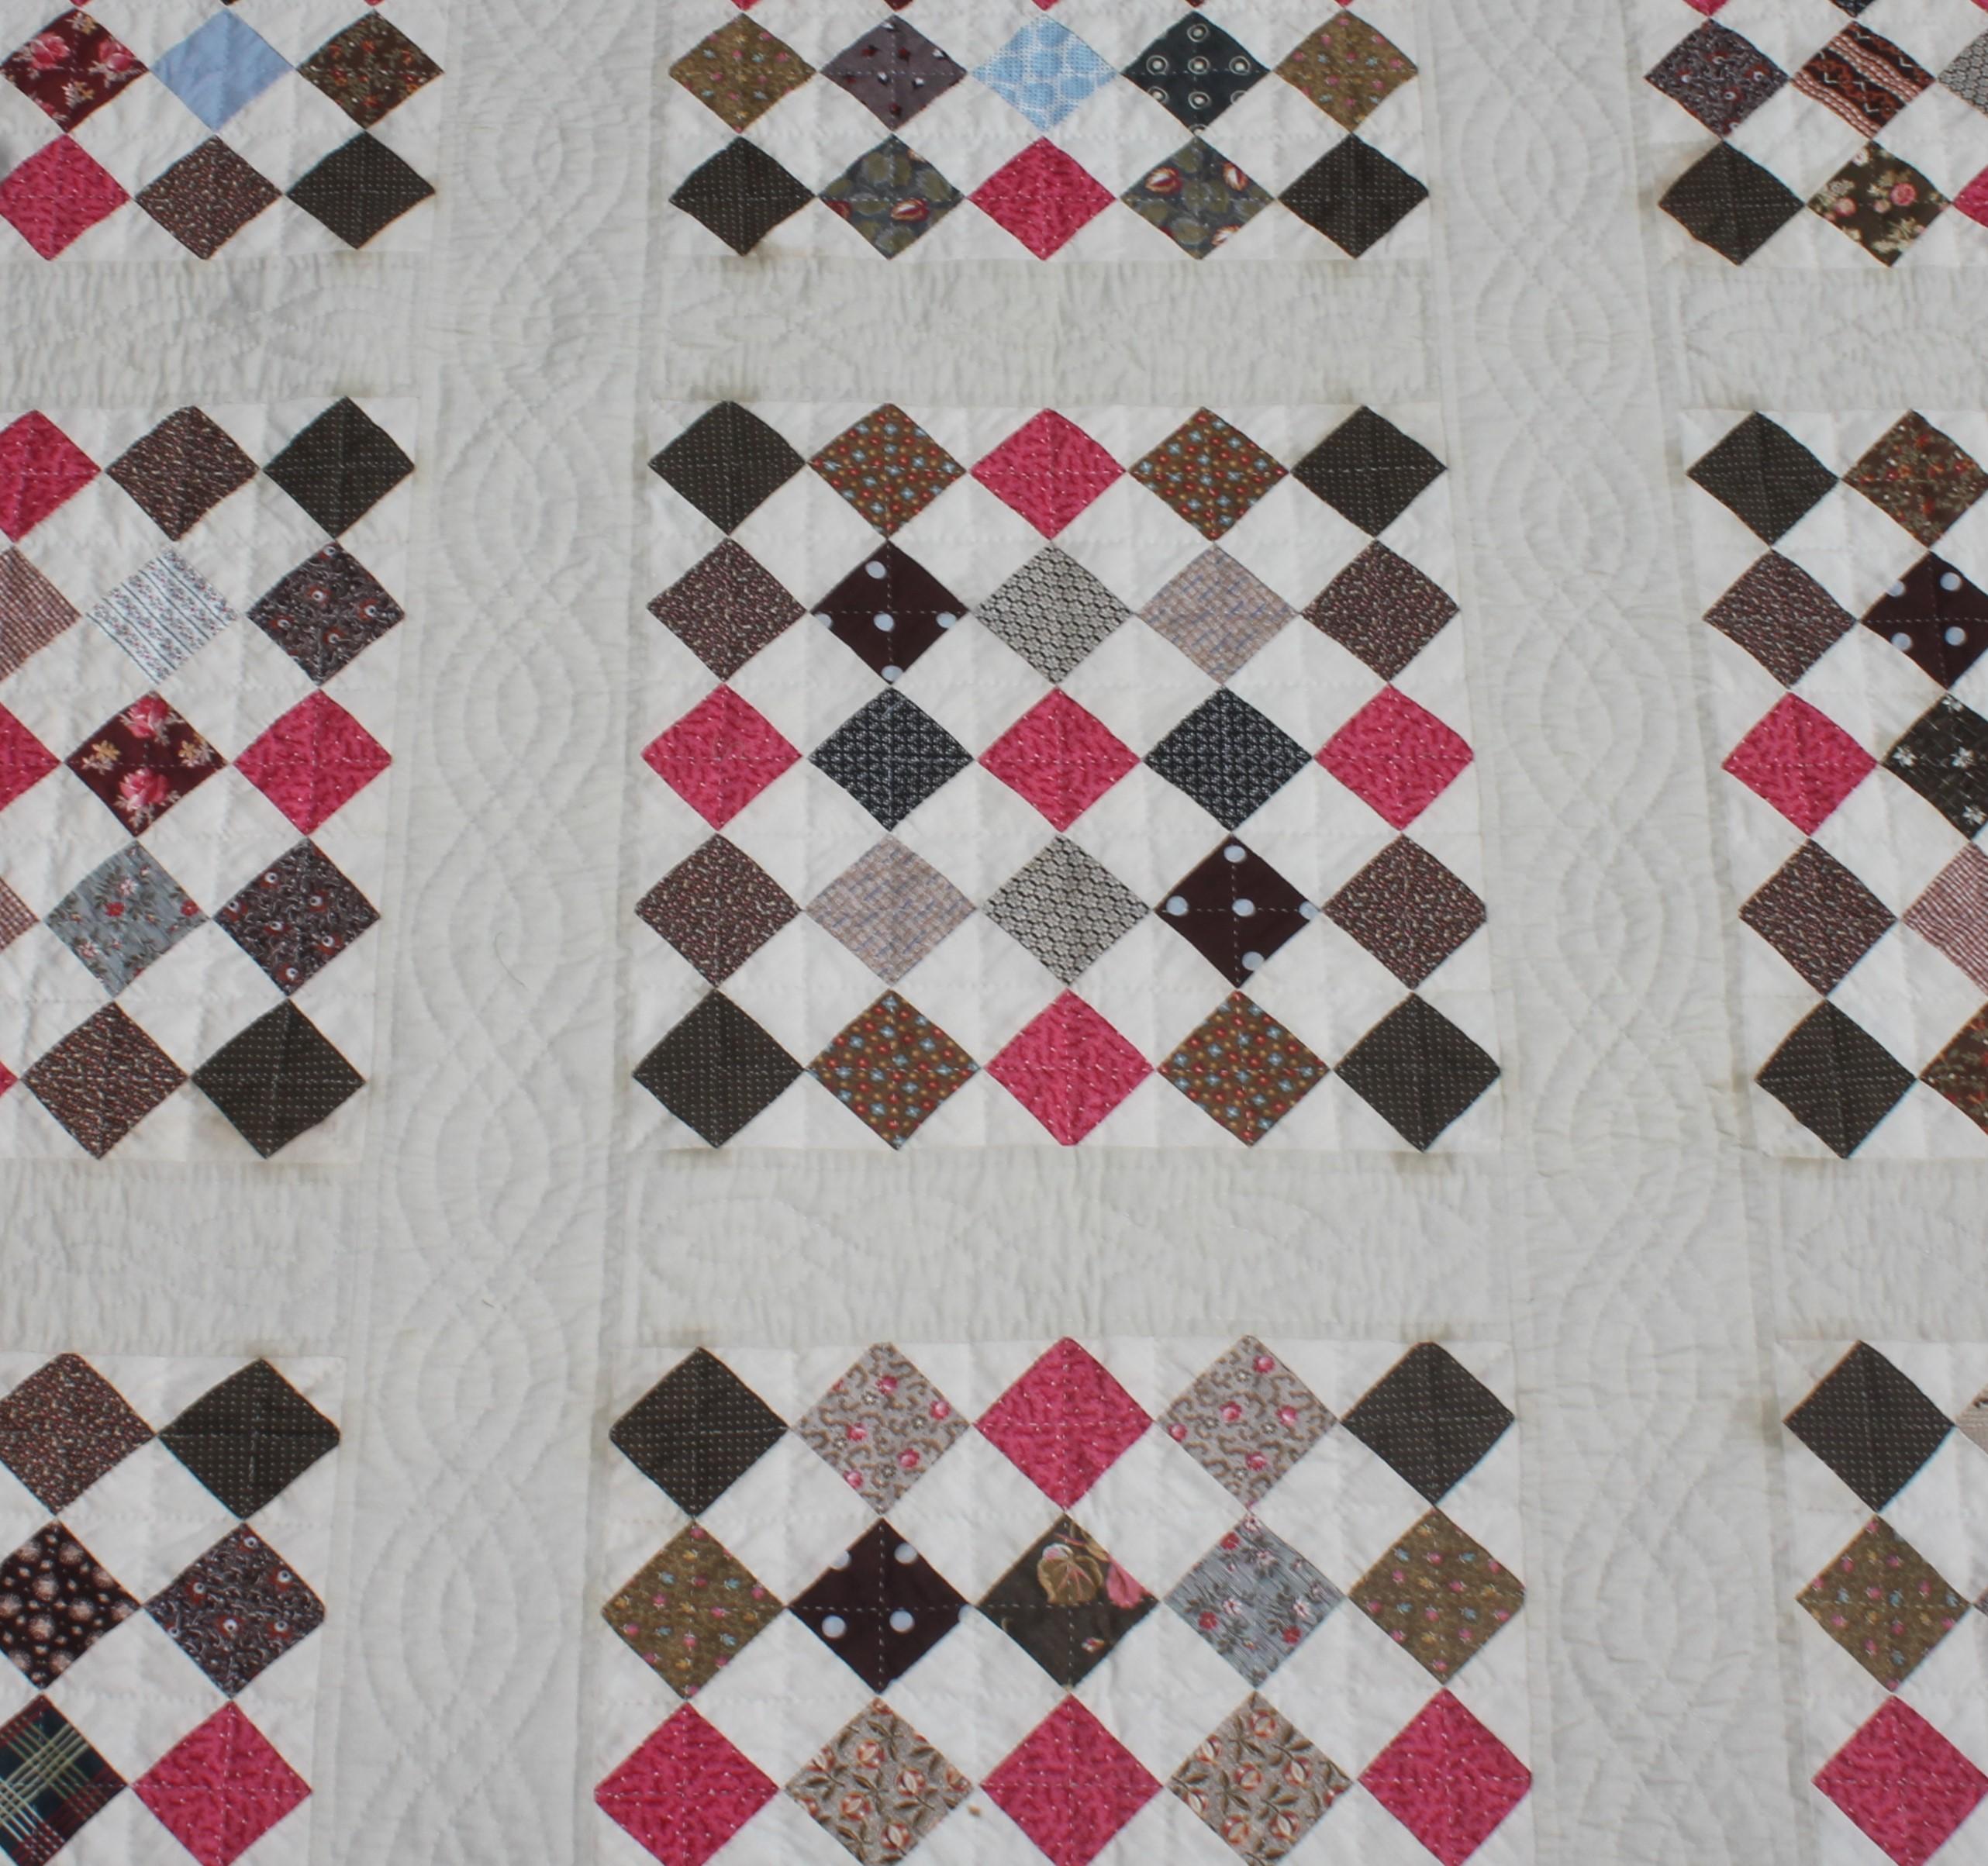 Adirondack One Patch Contained Blocks Quilt For Sale